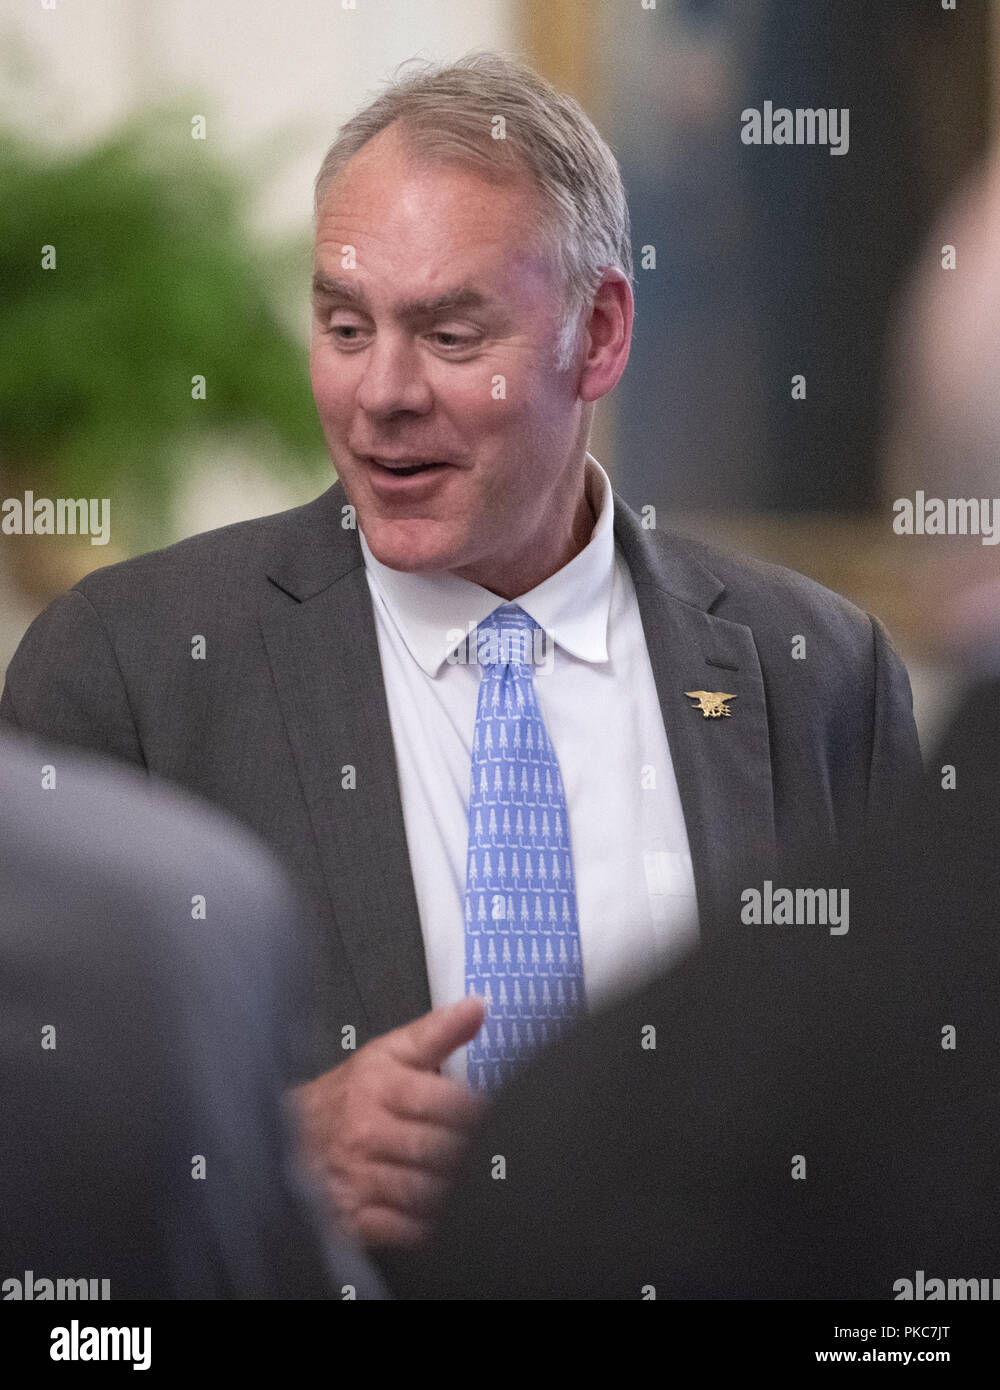 Washington, District of Columbia, USA. 12th Sep, 2018. United States Secretary of Interior Ryan Zinke in conversation prior to the arrival of US President Donald J. Trump who will make remarks at the Congressional Medal of Honor Society Reception in the East Room of the White House in Washington, DC on Wednesday, September 12, 2018 Credit: Ron Sachs/CNP/ZUMA Wire/Alamy Live News Stock Photo